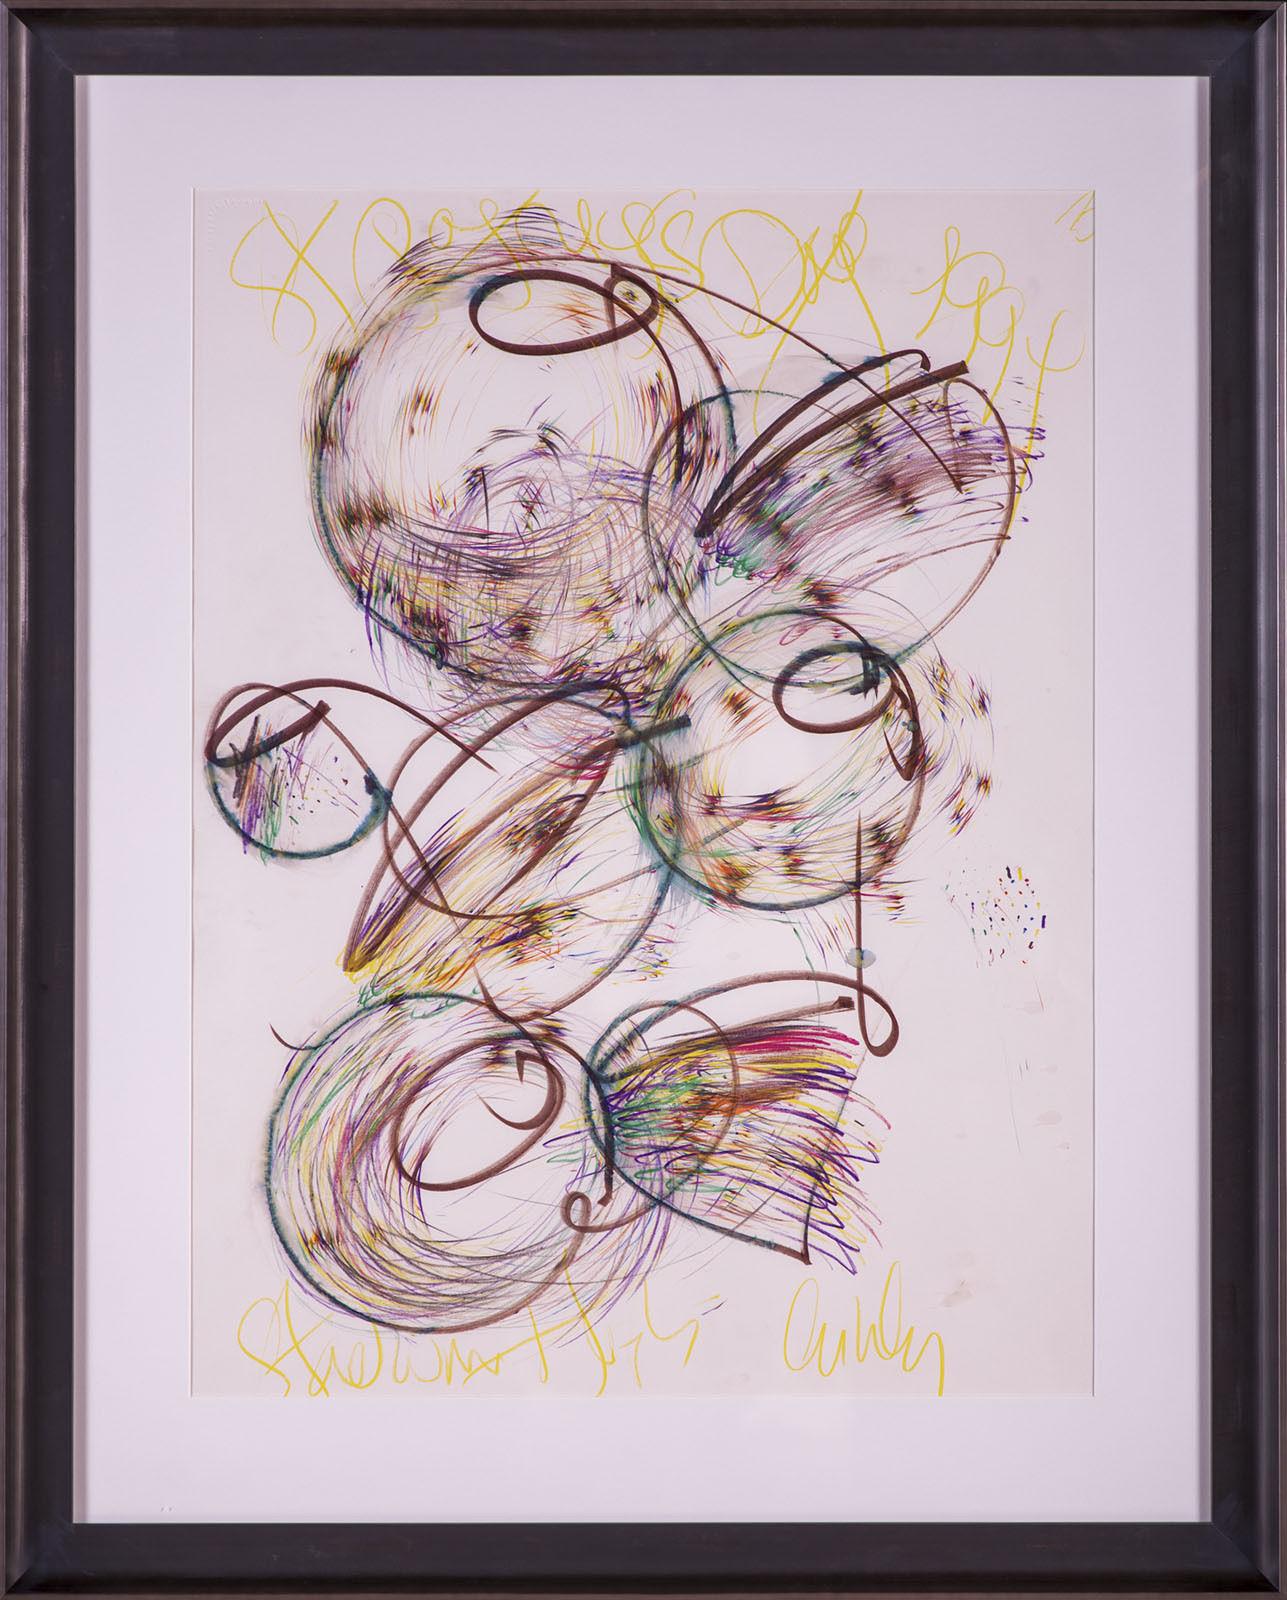 Dale Chihuly - St Patrick's Day Baskets
Artist: Dale Chihuly
Medium: Original Drawing 
Dimensions: 36" x 28"
Framed: 39" x 31"
Signed and titled across the top


Excellent condition.
Condition: The piece has four indentations the size of a pencil